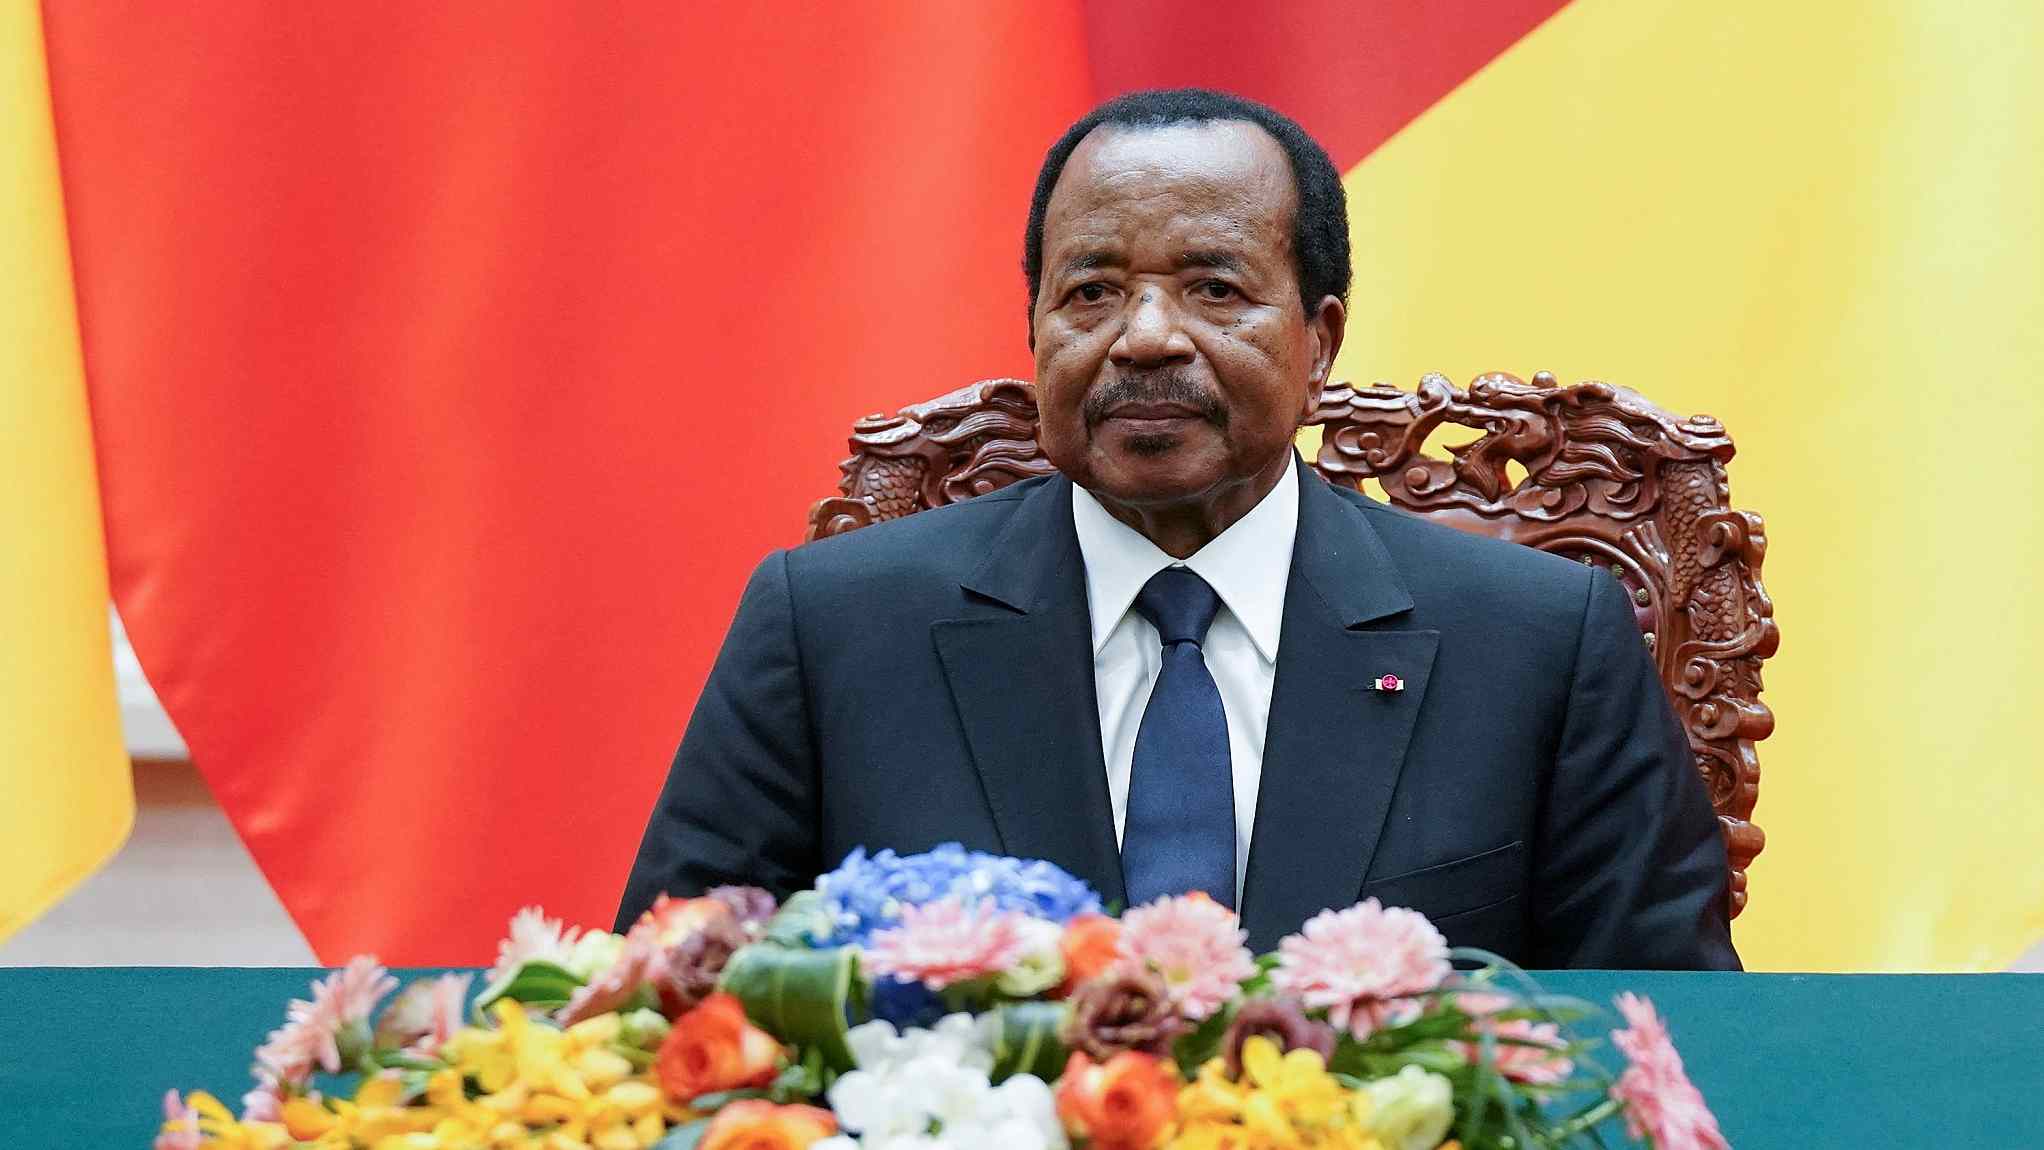 Newly elected Cameroonian president is sworn in CGTN